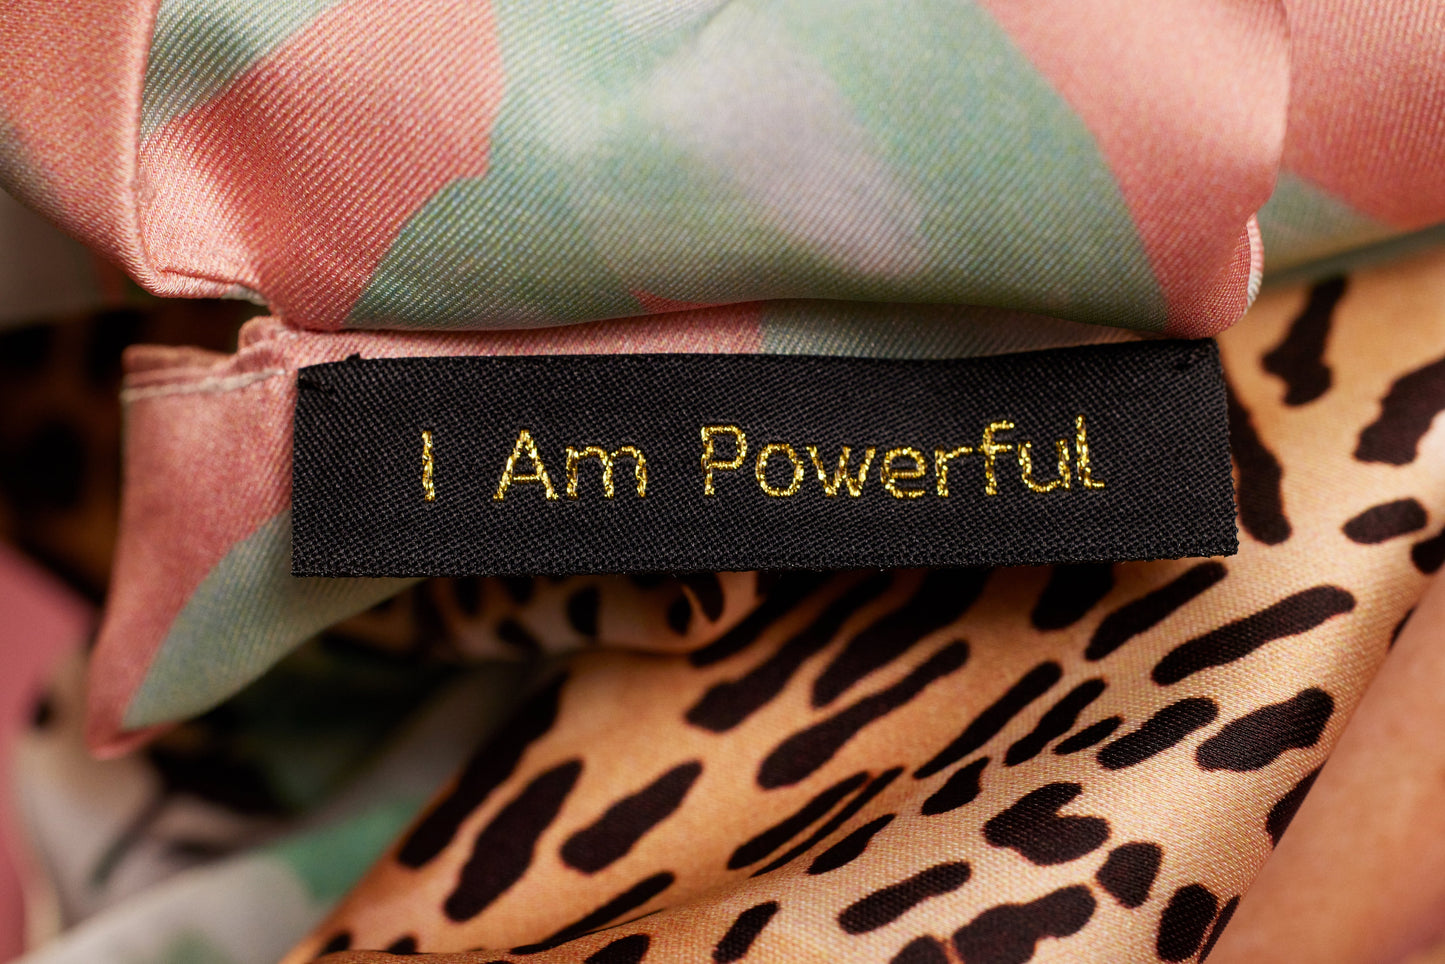 Clothing tag from womens duster with a motivational quote